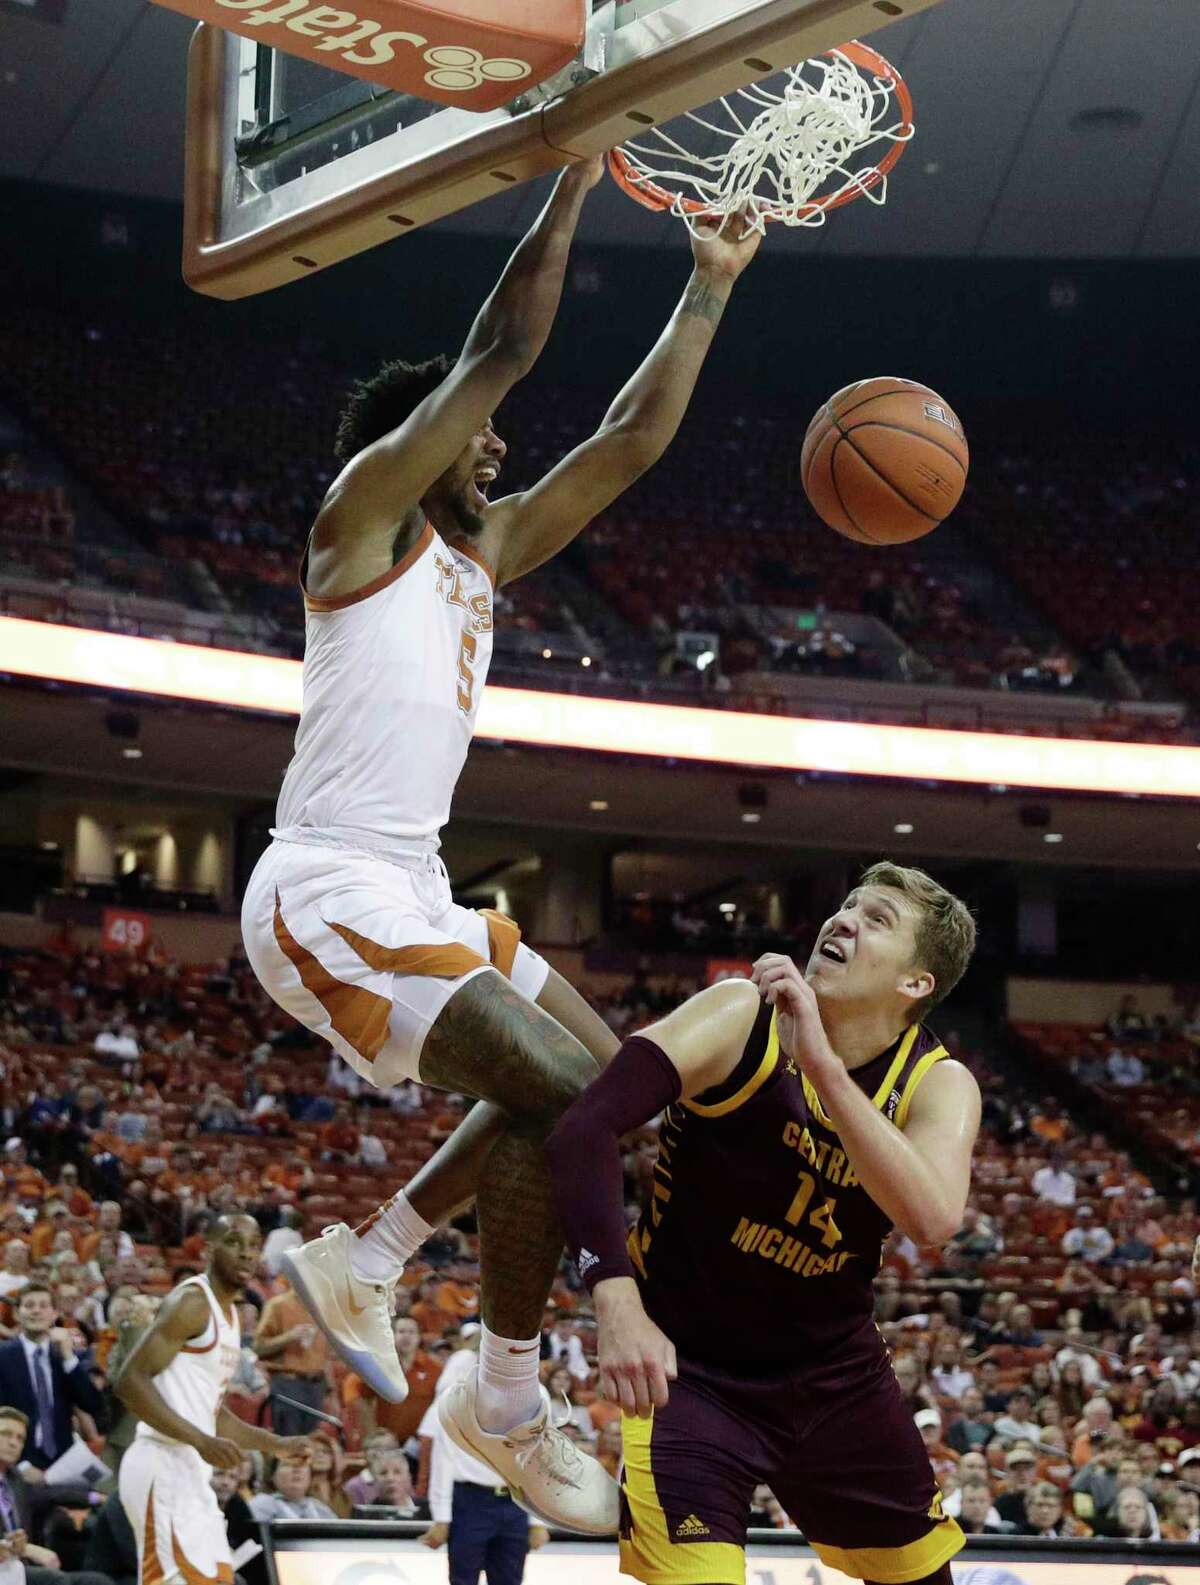 Texas forward Royce Hamm Jr. (5) scores over Central Michigan forward David DiLeo (14) during the second half of an NCAA college basketball game, Saturday, Dec. 14, 2019, in Austin, Texas. (AP Photo/Eric Gay)